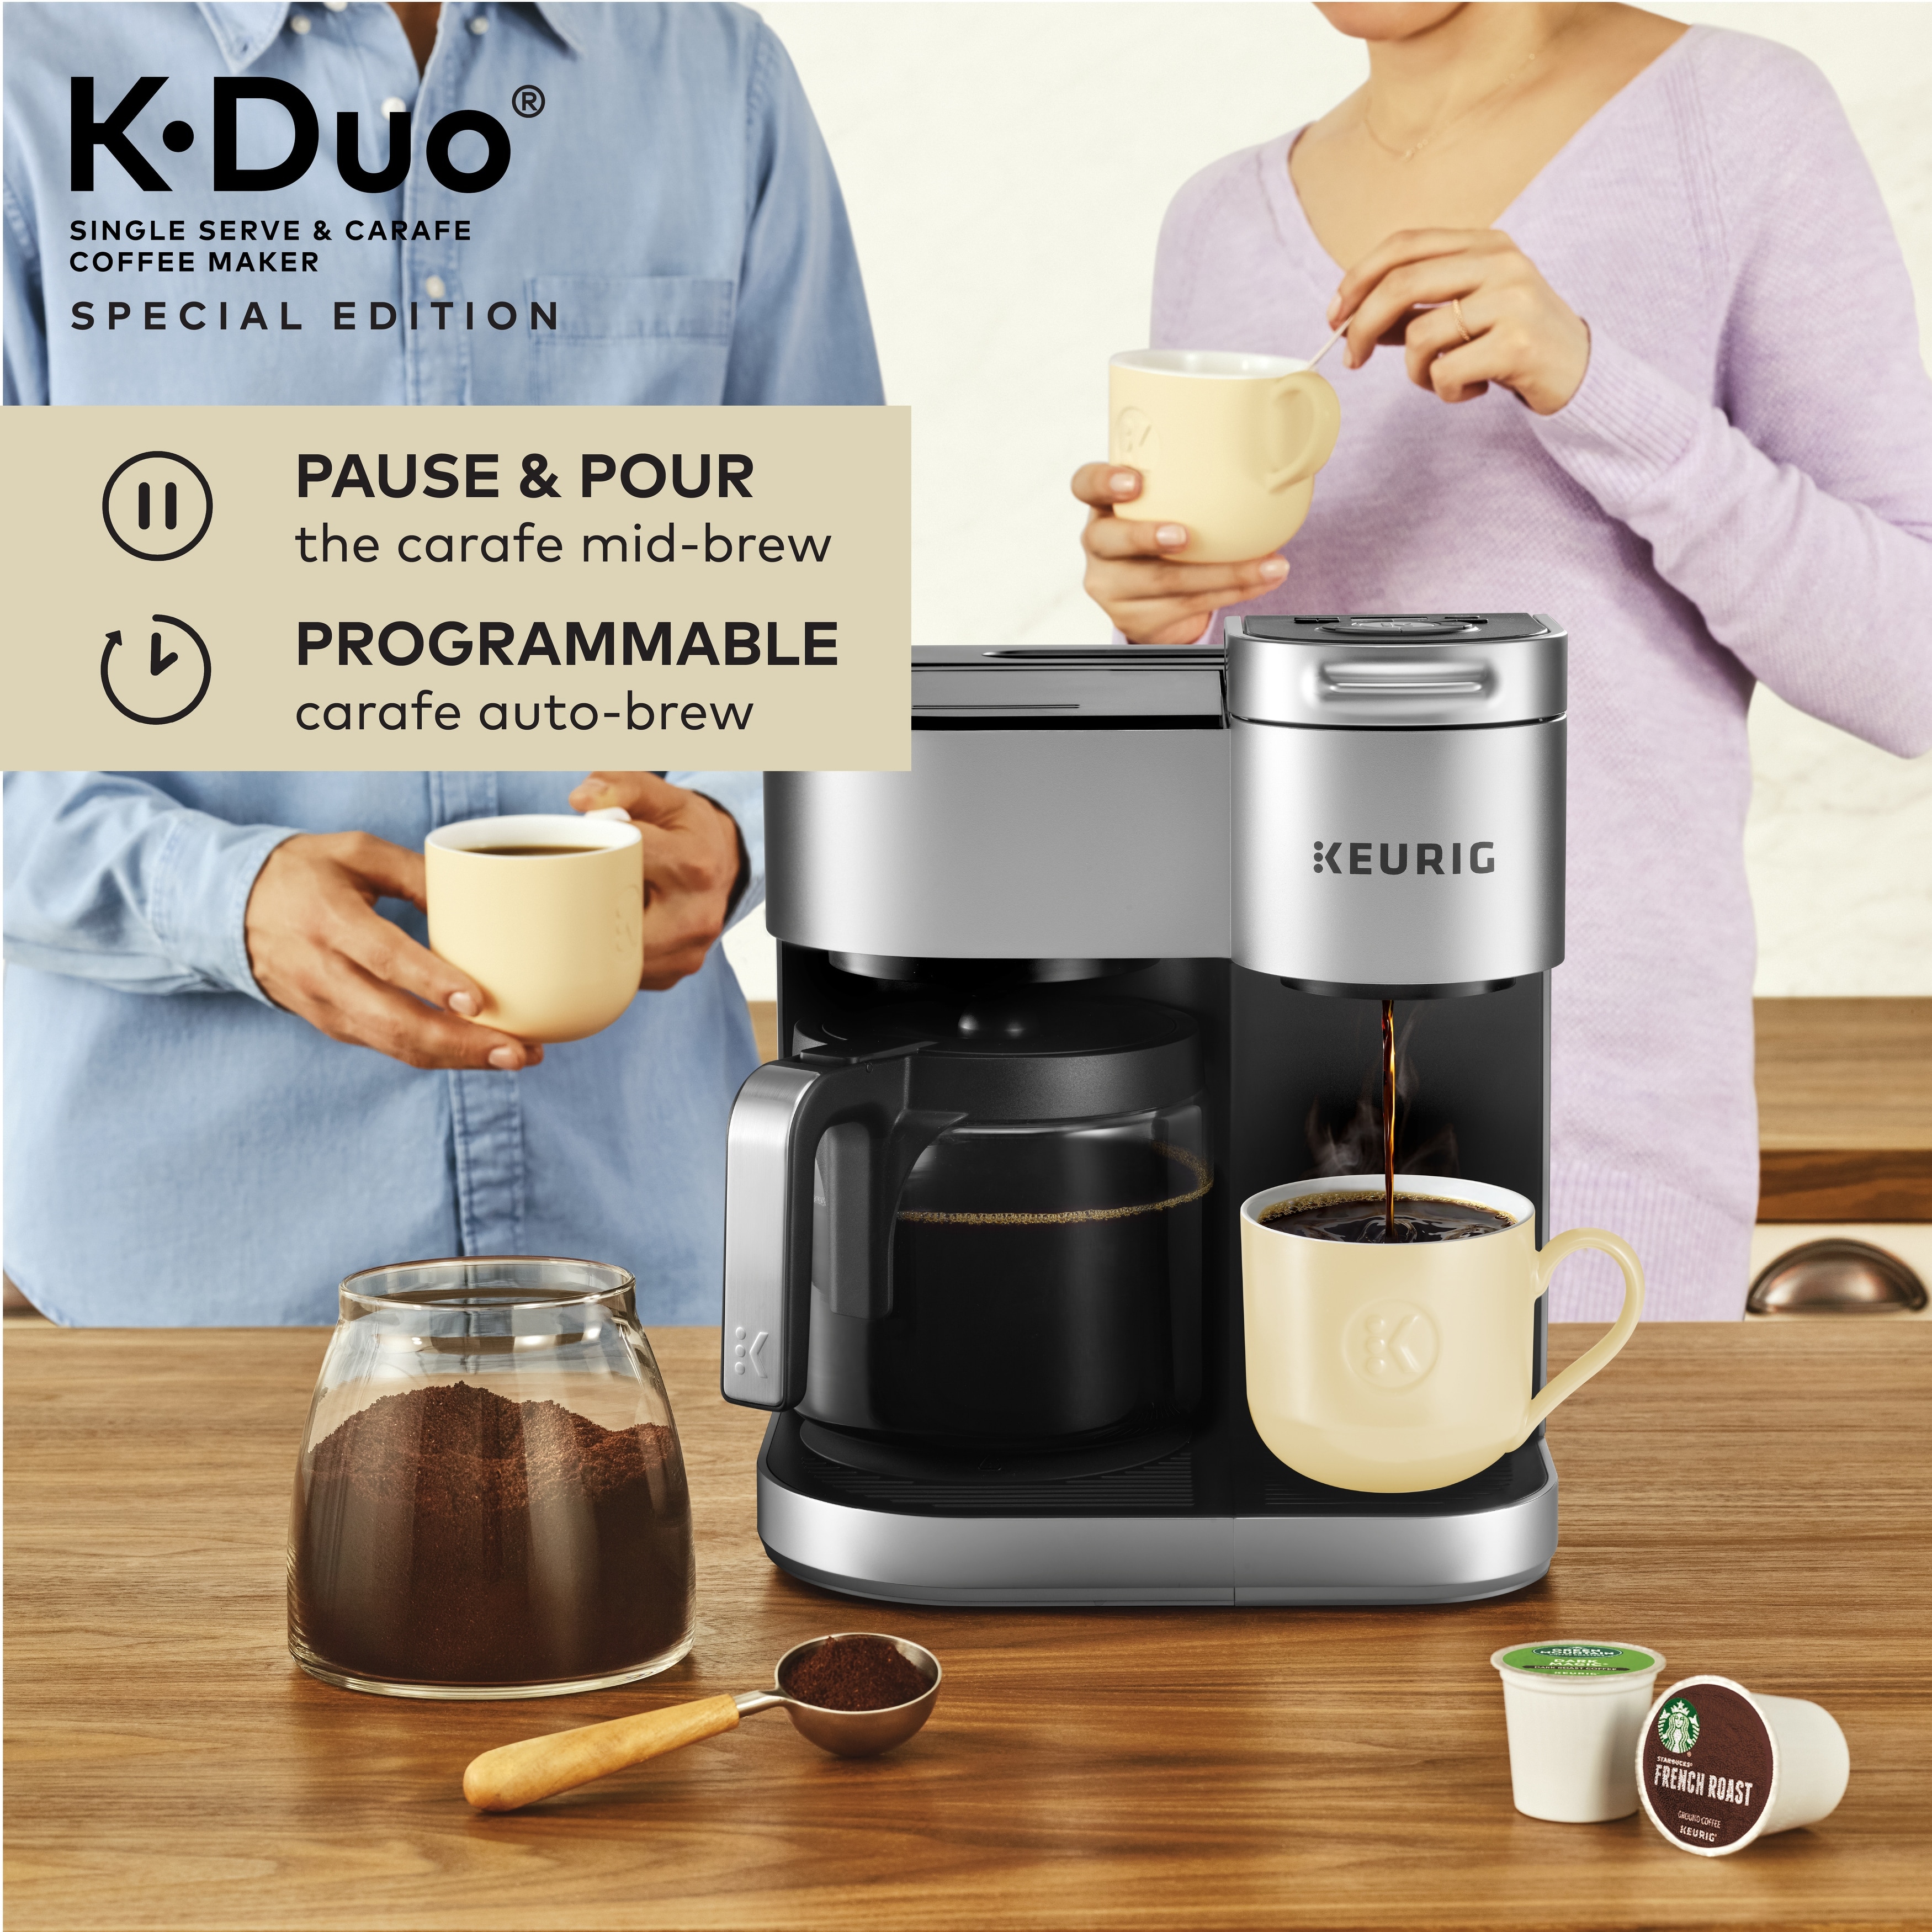 https://ak1.ostkcdn.com/images/products/is/images/direct/71caacc4d2aee882465602af303800abeb02dfe8/Keurig%C2%AE-K-Duo%C2%AE-Special-Edition-Single-Serve-%26-Carafe-Coffee-Maker.jpg